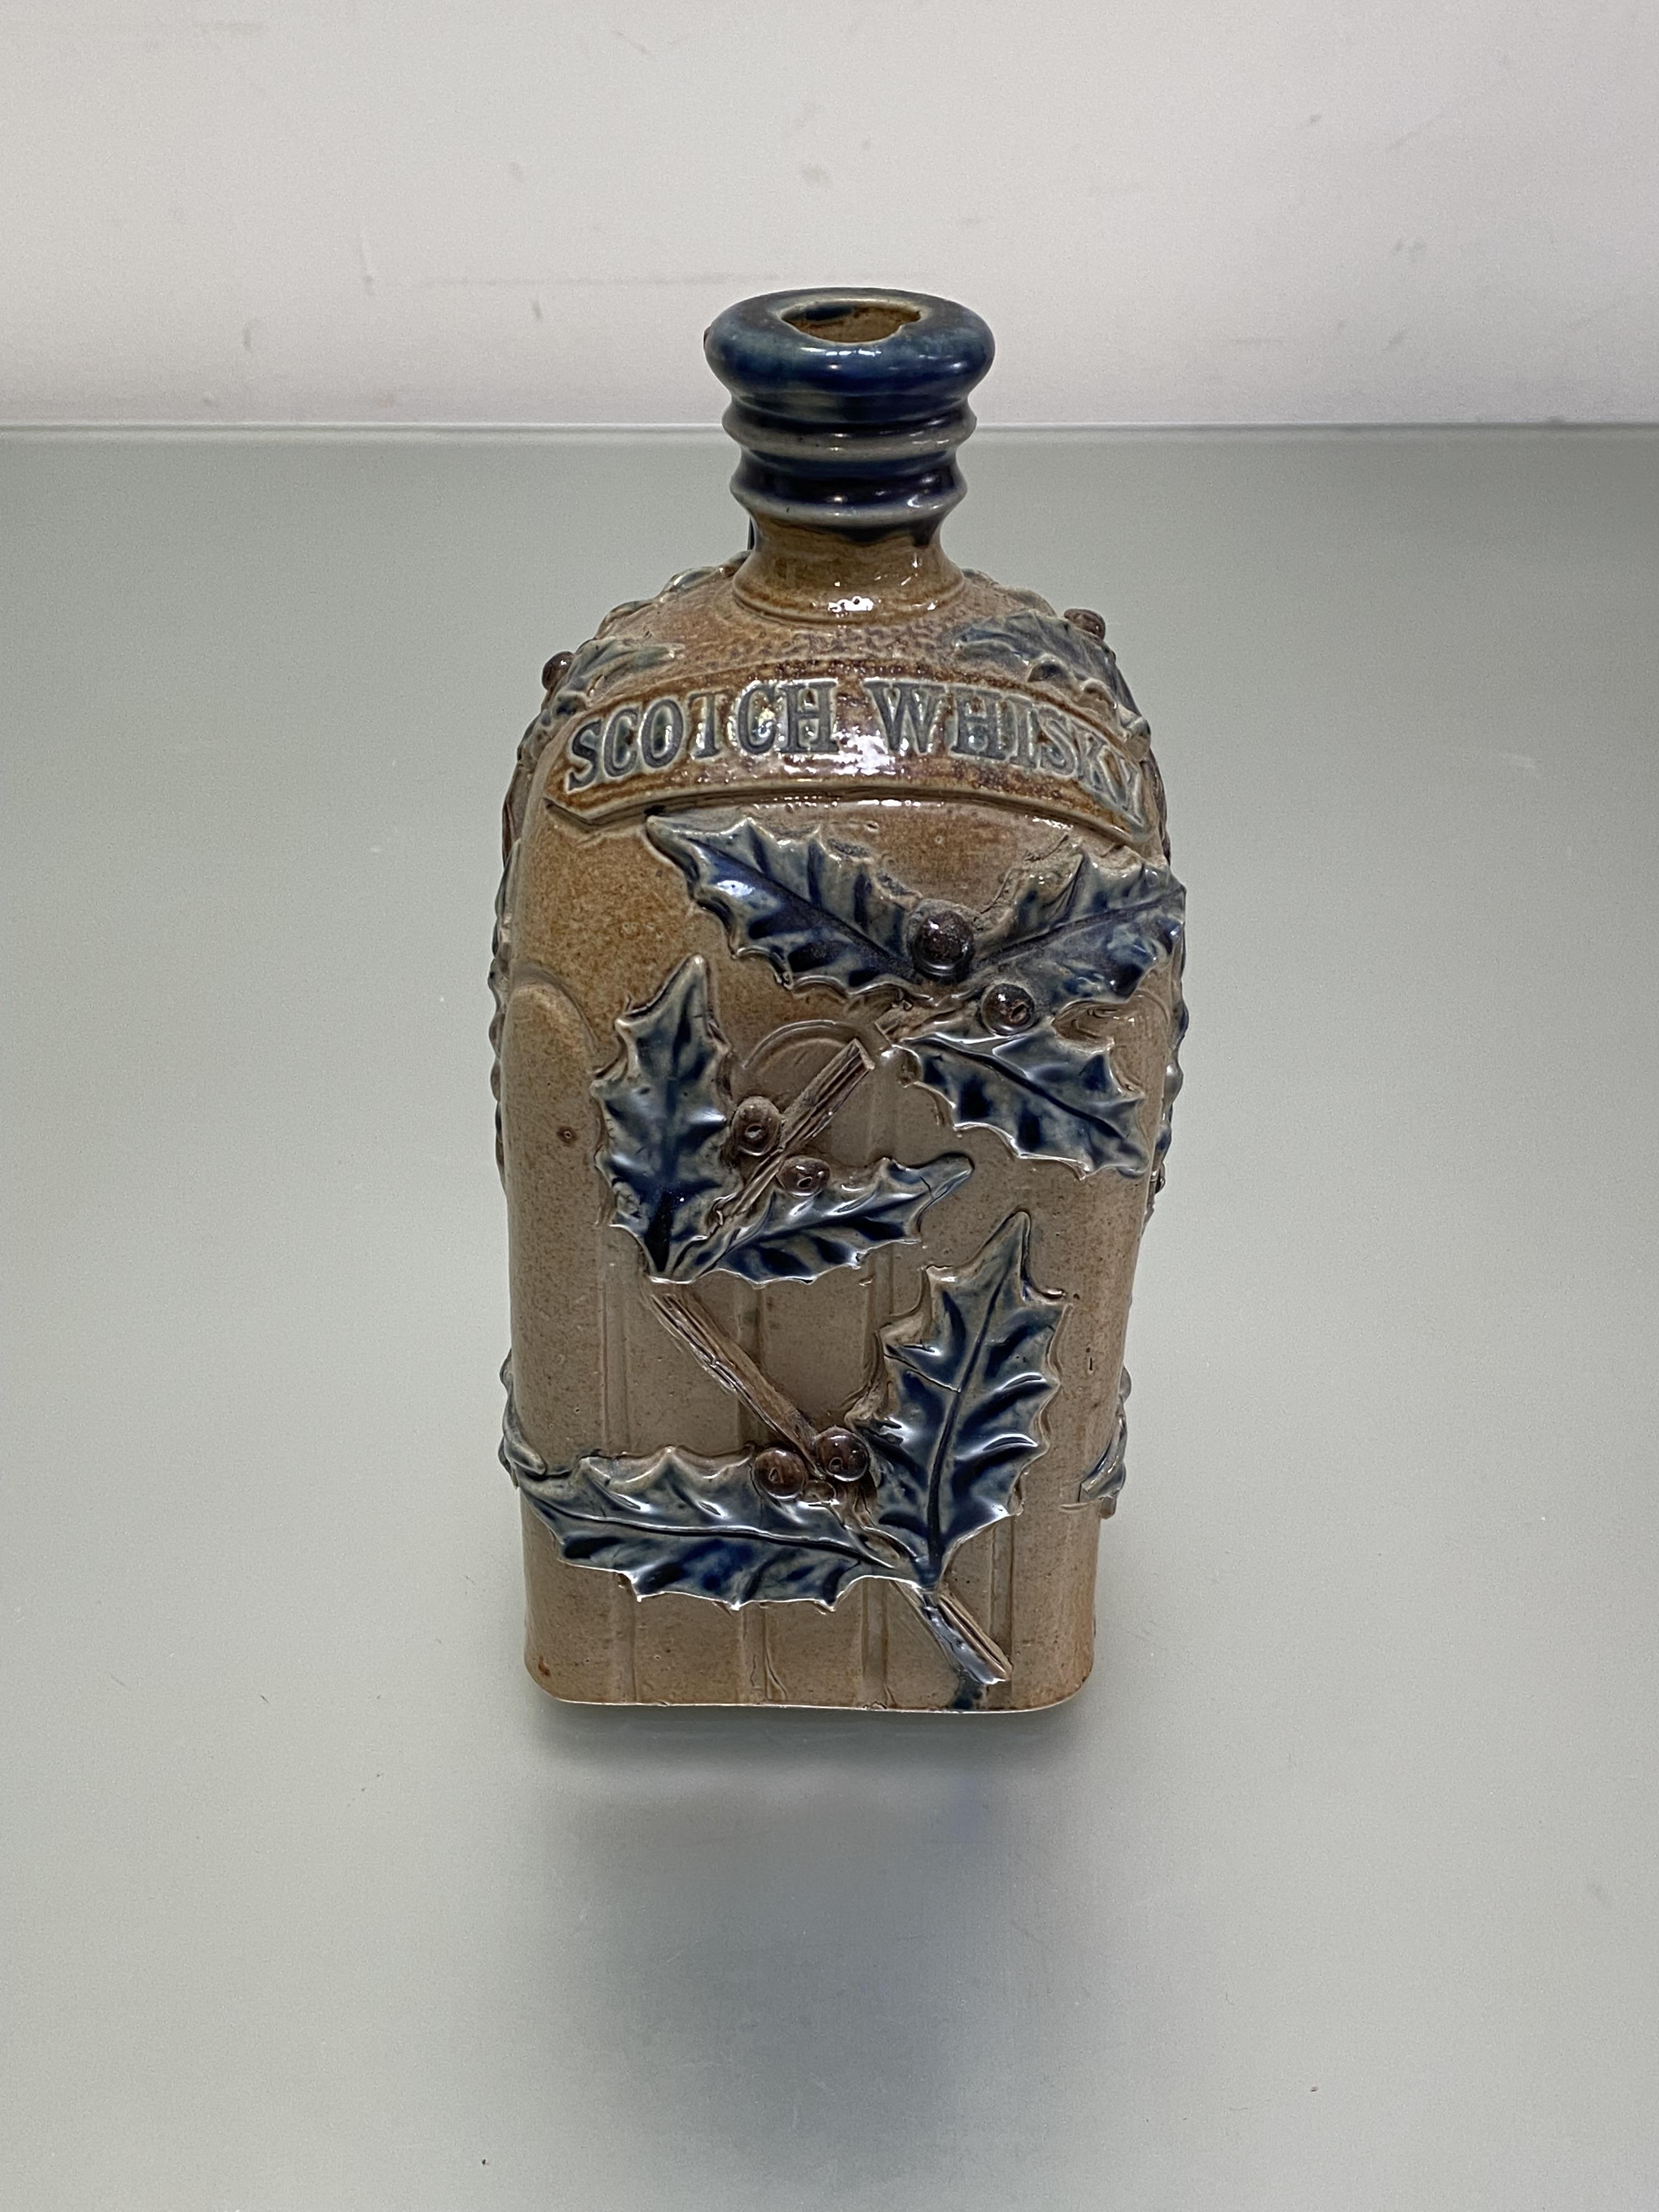 An unusual stoneware Scotch Whisky decanter, late 19th century, probably Doulton Lambeth, of - Image 4 of 4